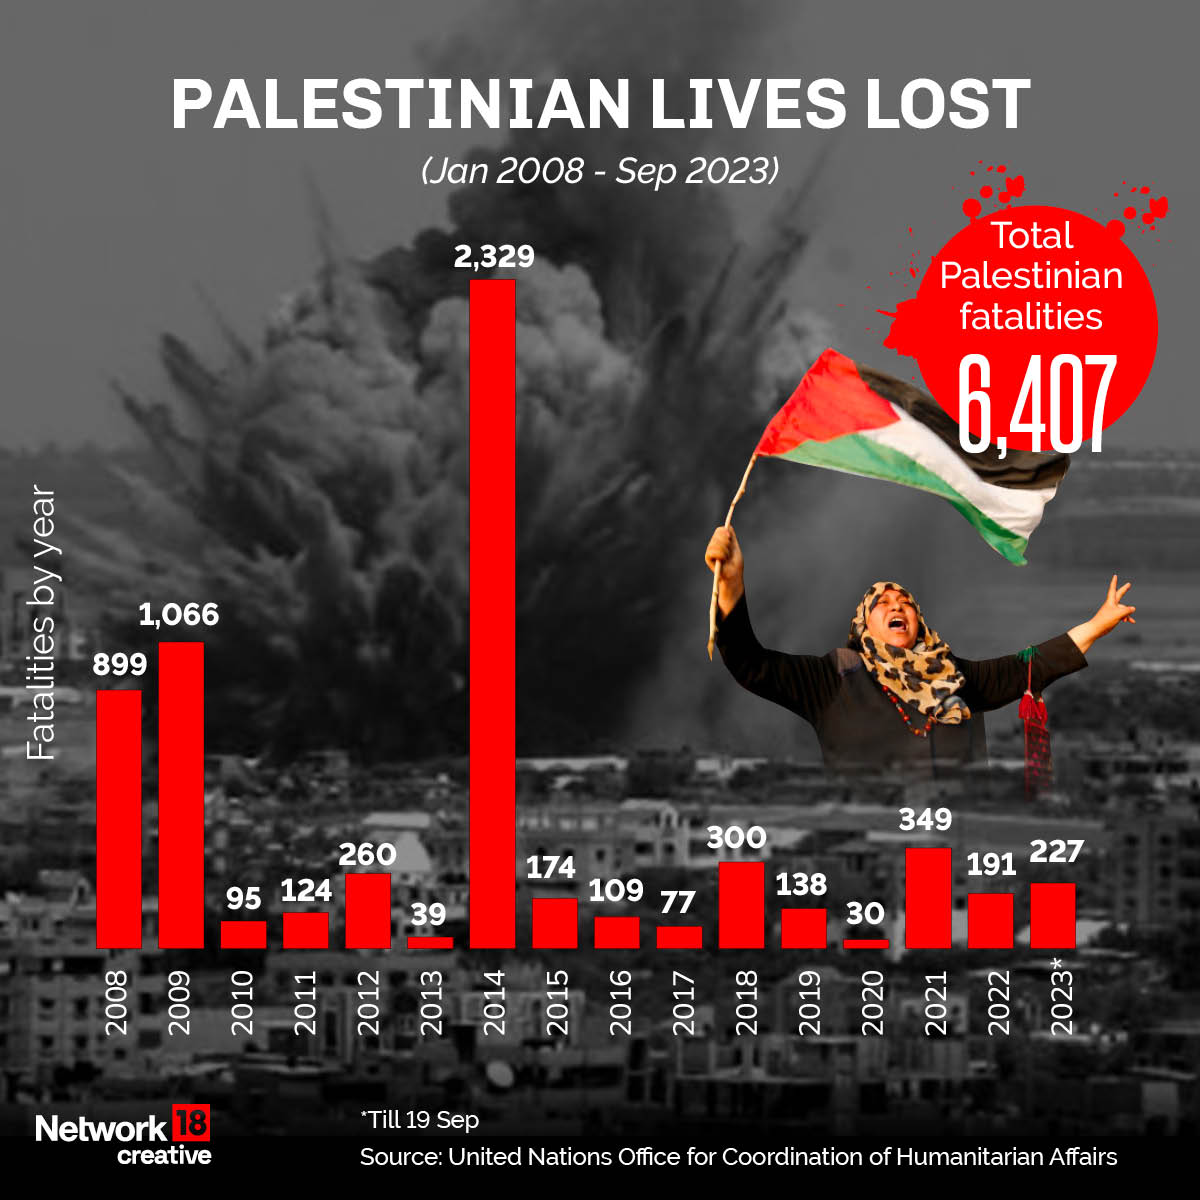 Israel-Palestine conflict: The human cost of war